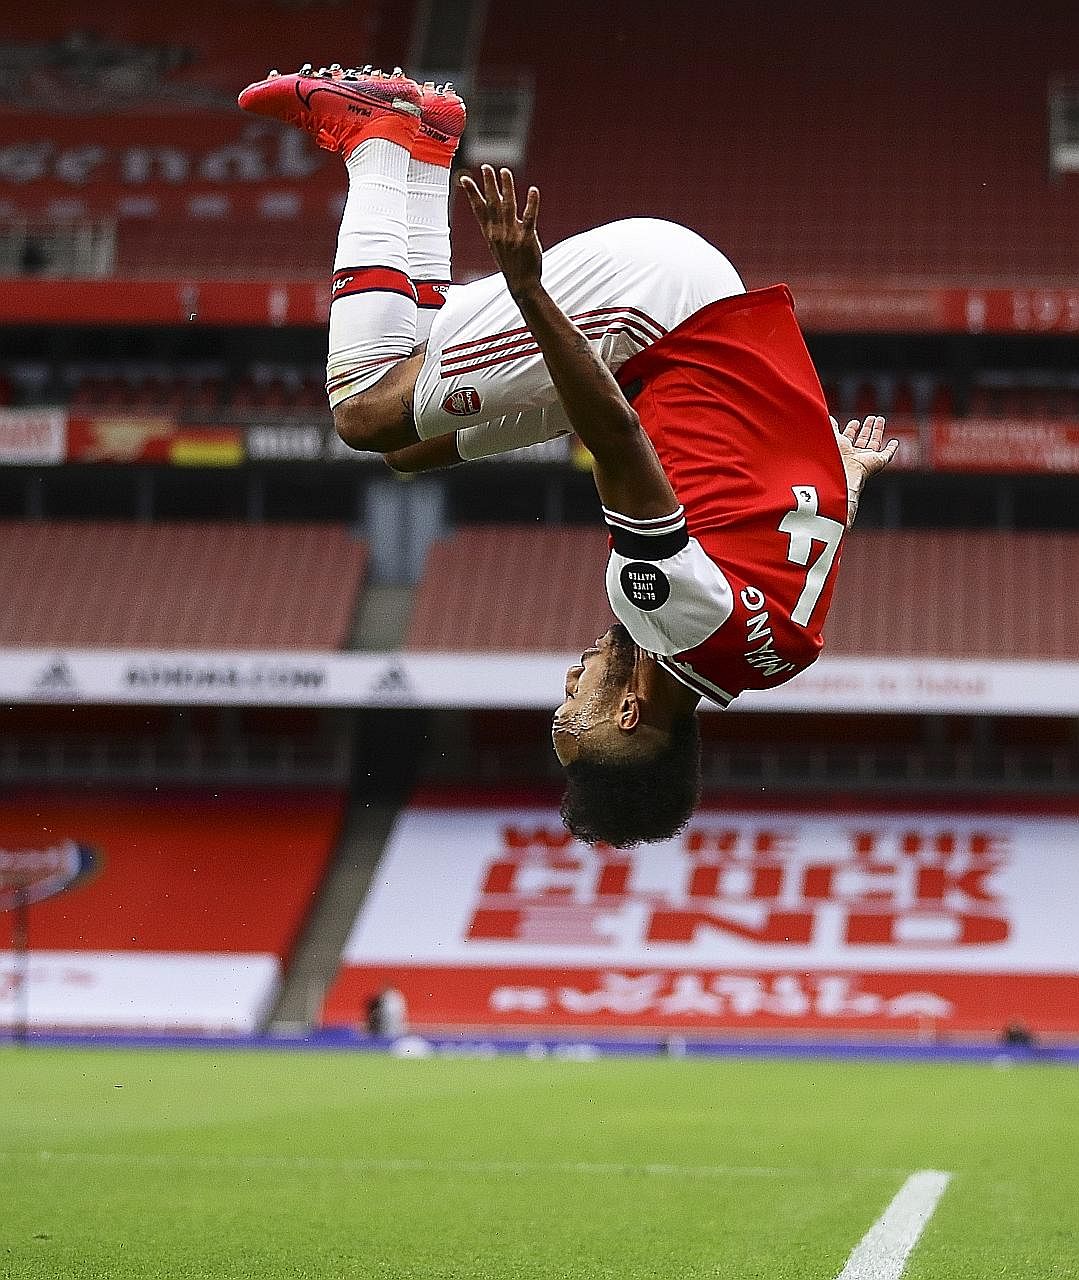 Pierre-Emerick Aubameyang doing his trademark flip after scoring Arsenal's third goal in their 4-0 Premier League victory over Norwich on Wednesday.